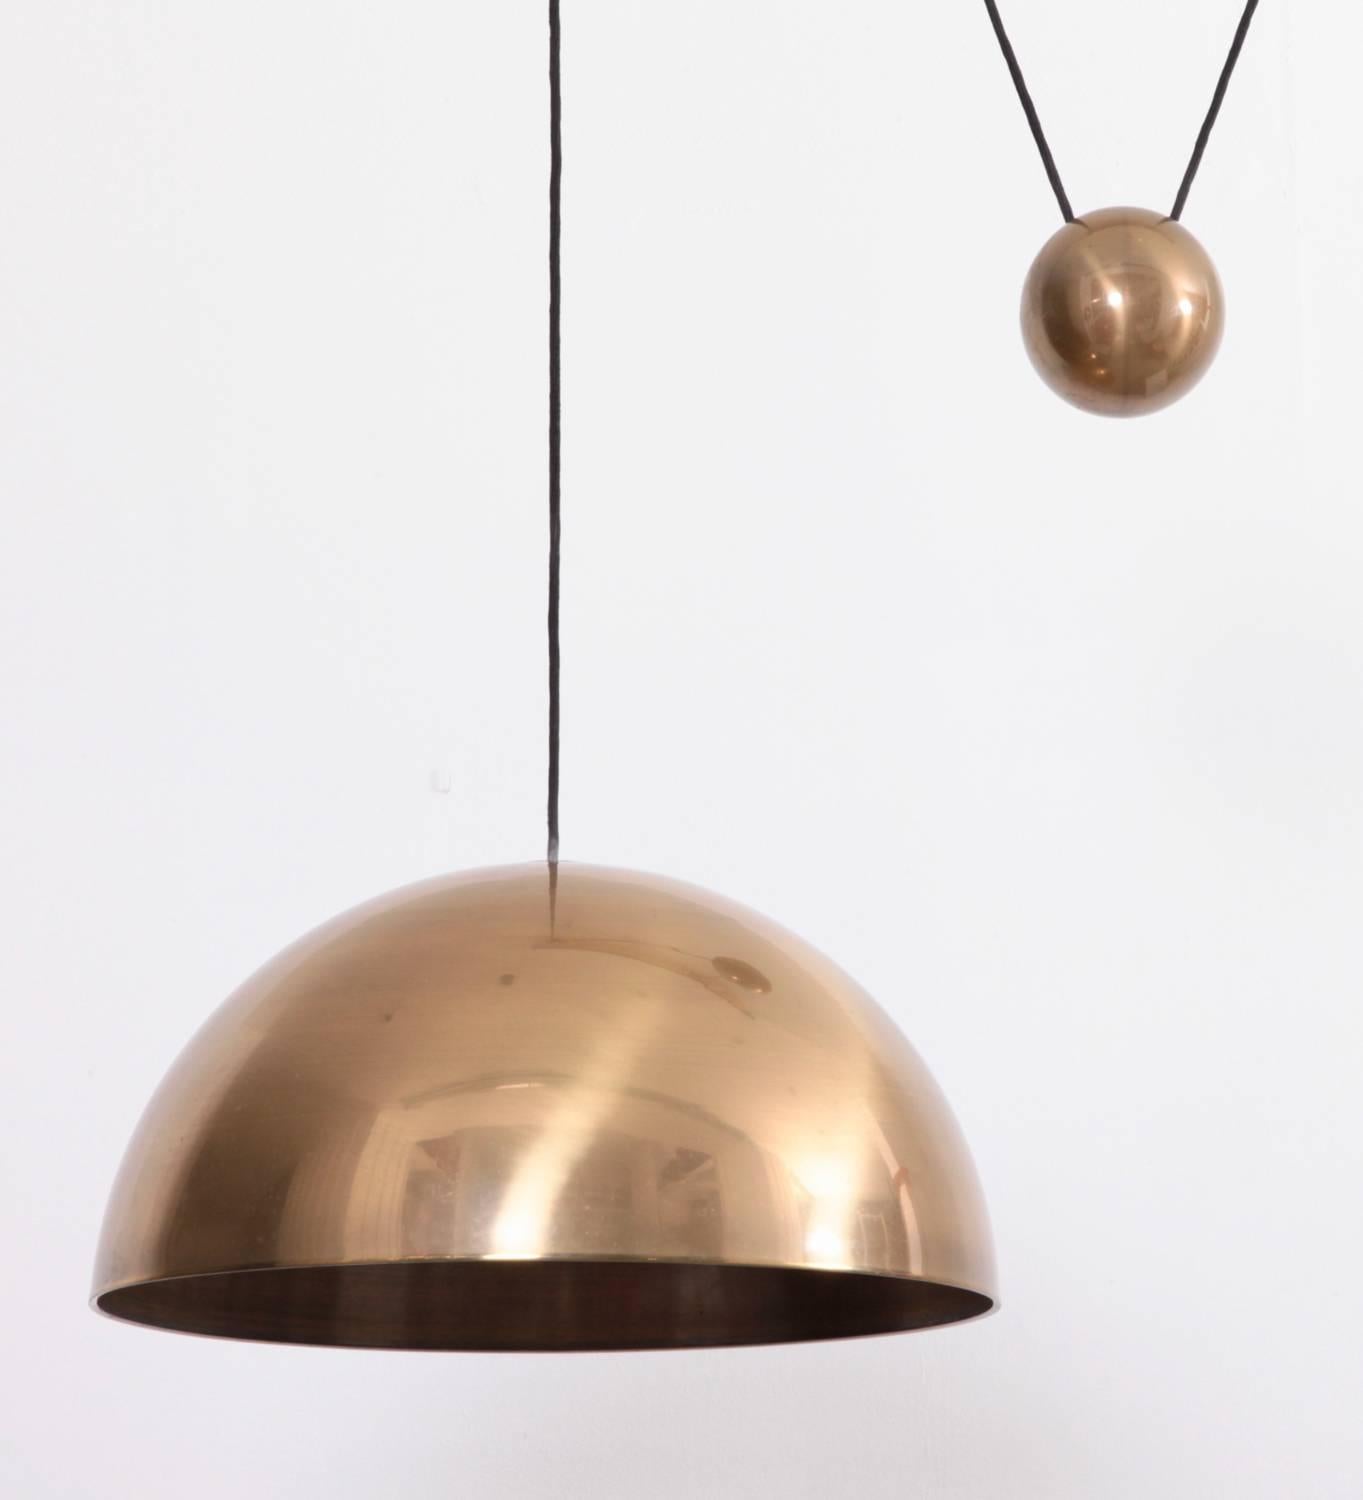 Large Florian Schulz Solan pendant lamp in very good condition.